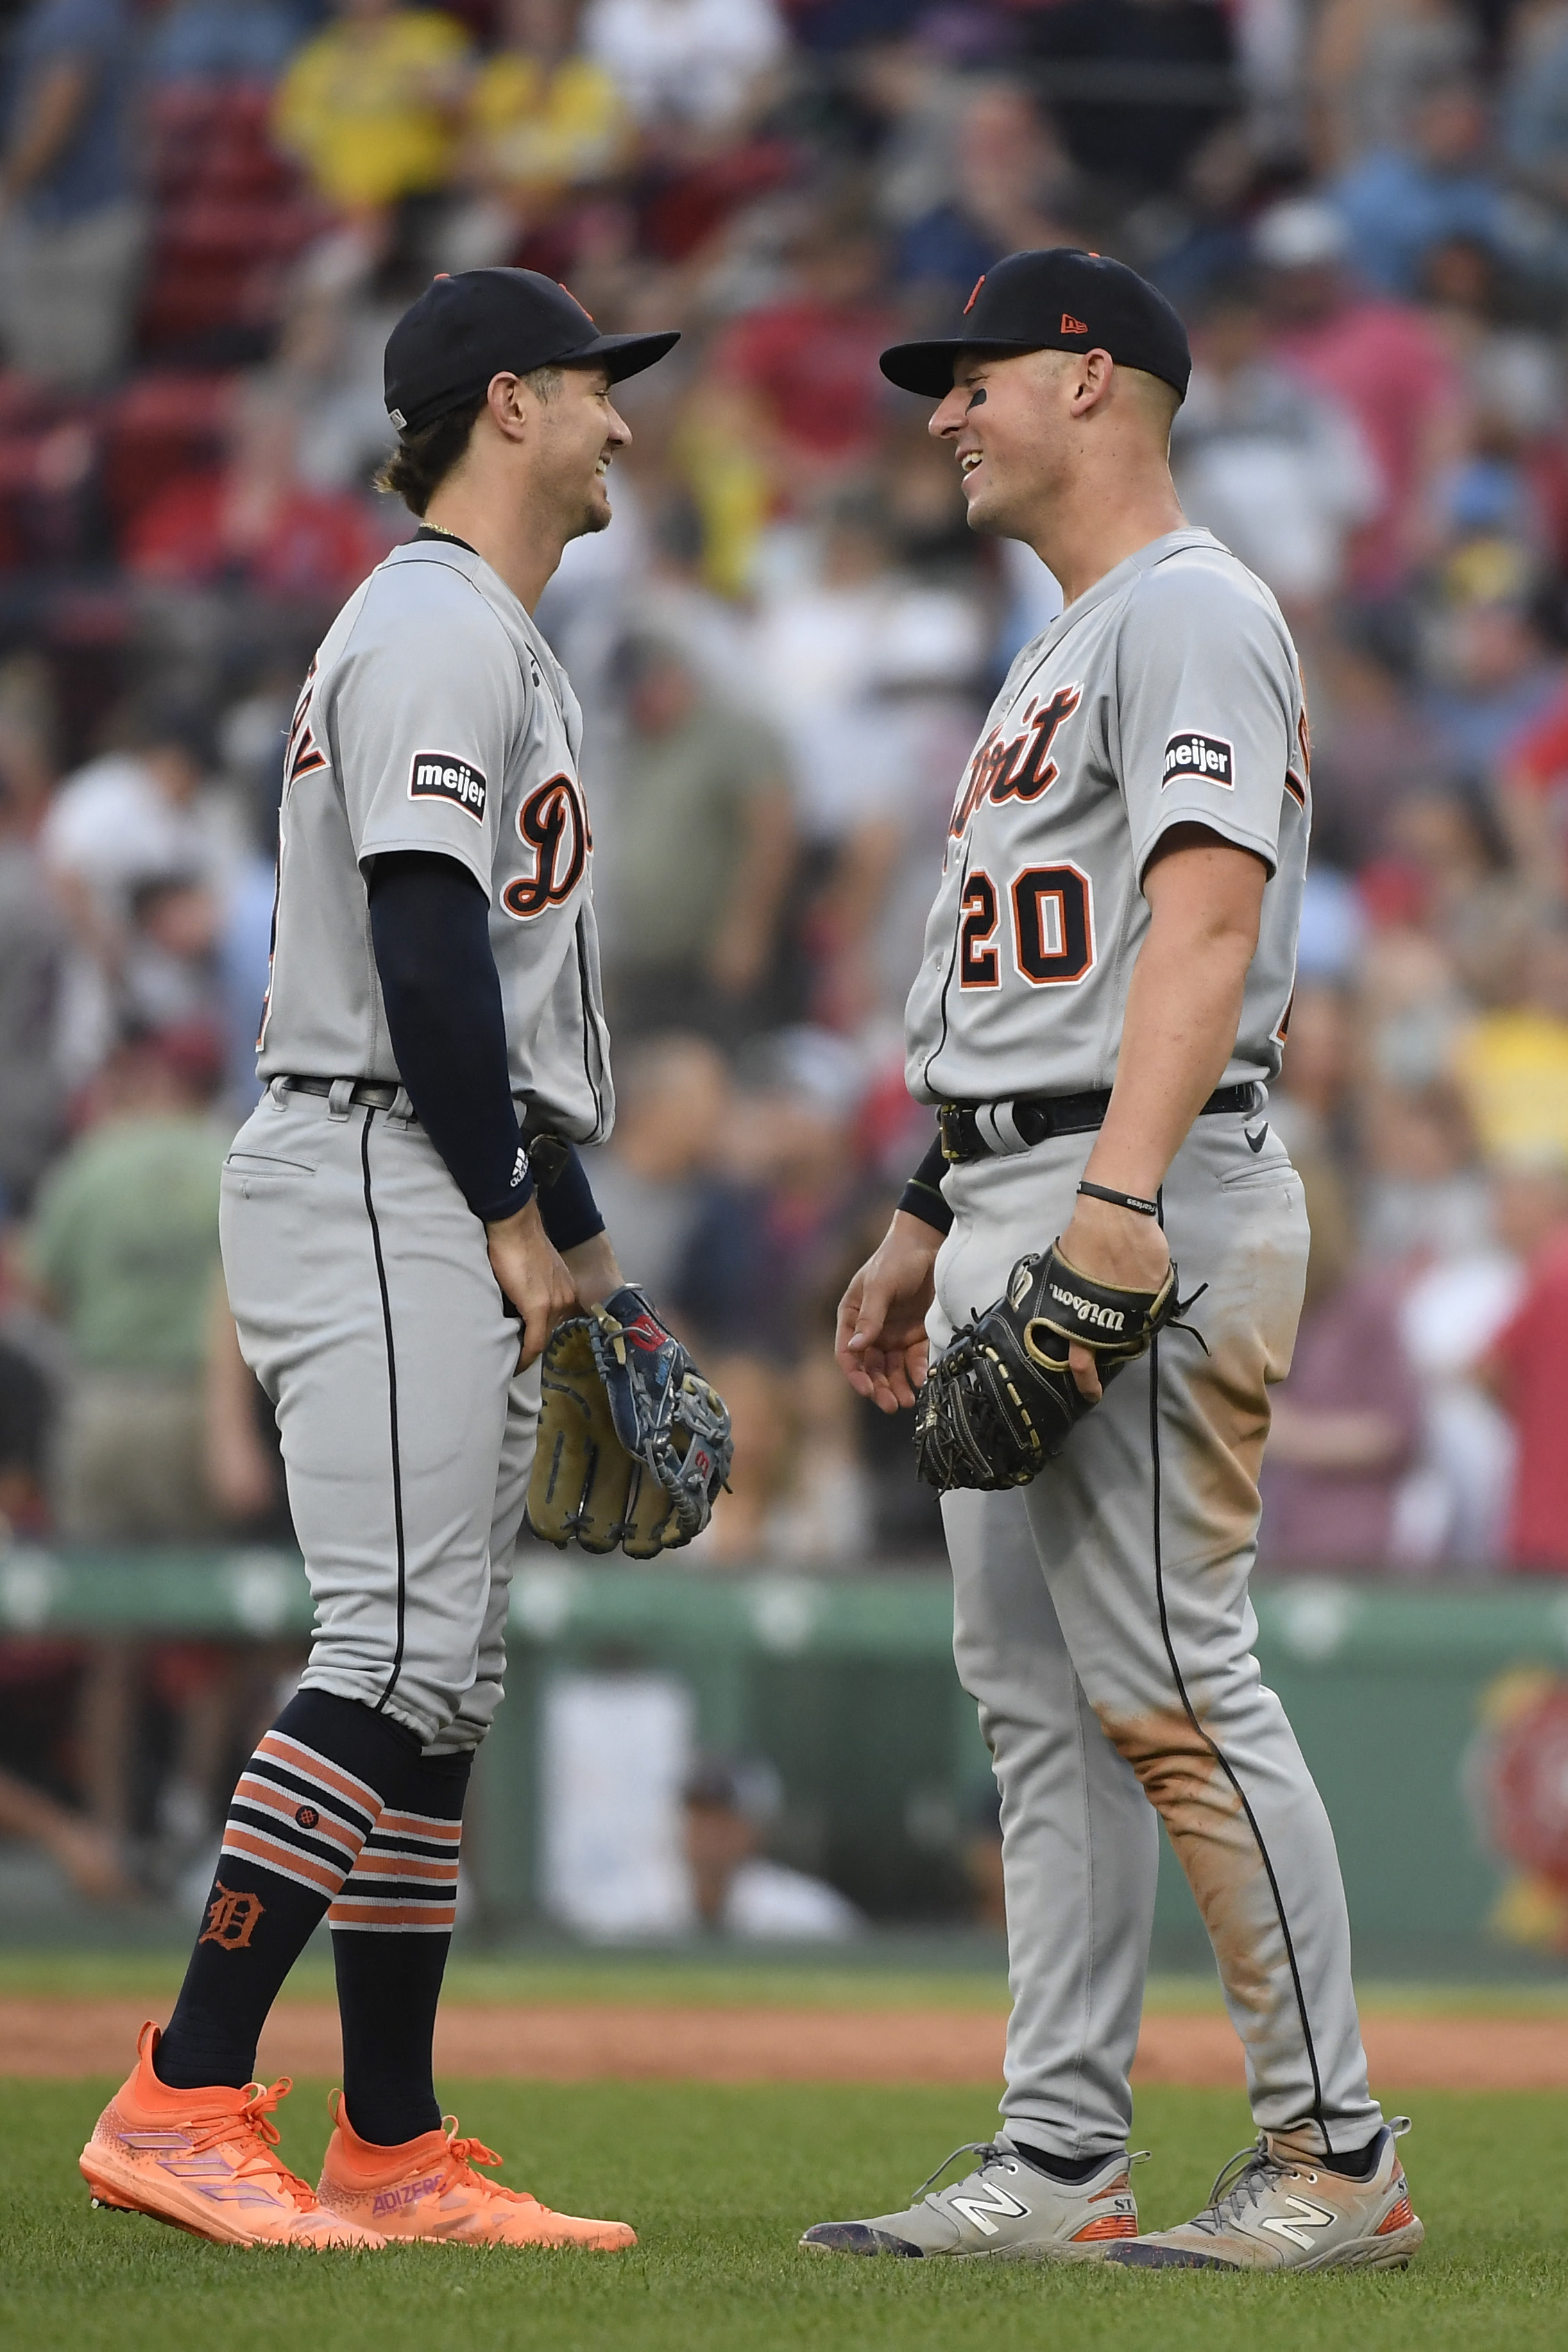 Kerry Carpenter (2 HRs), Tigers upend Red Sox